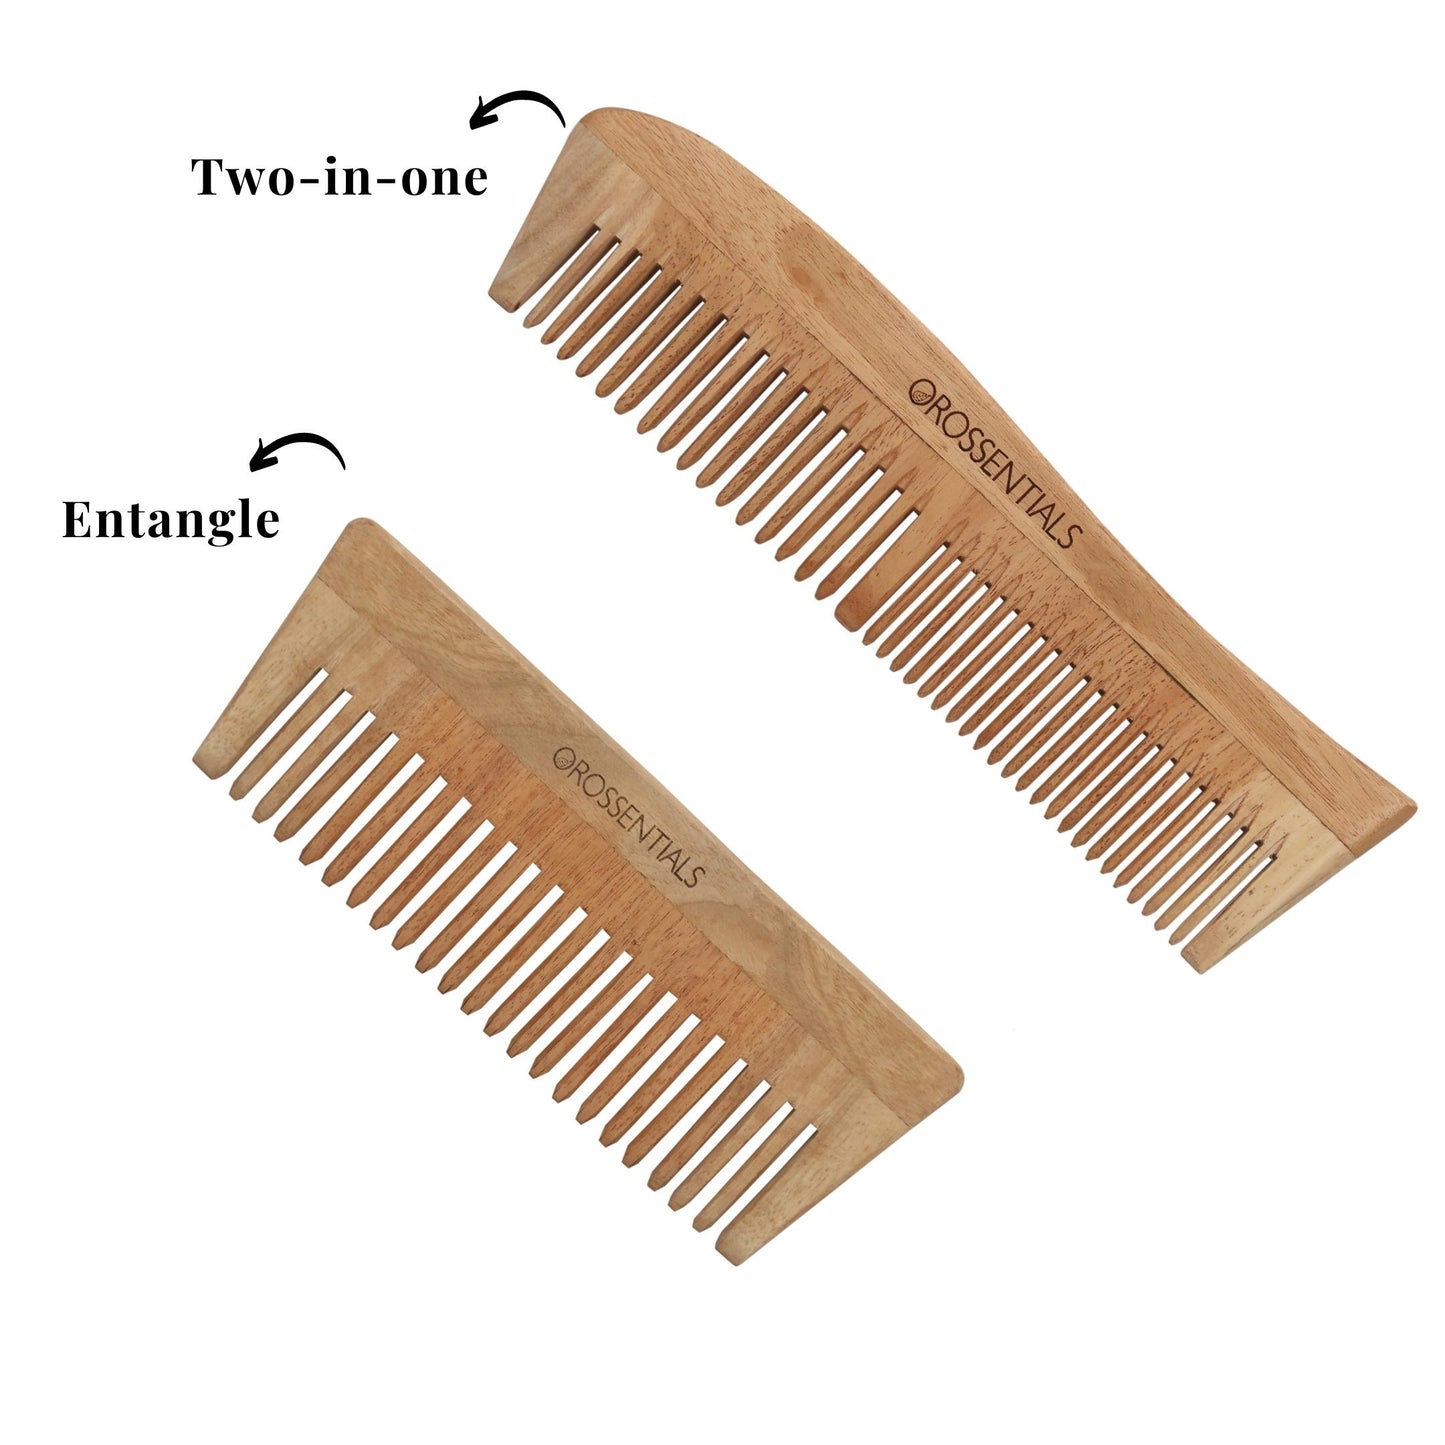 Wooden Comb set of 2- Entangle, Two in one